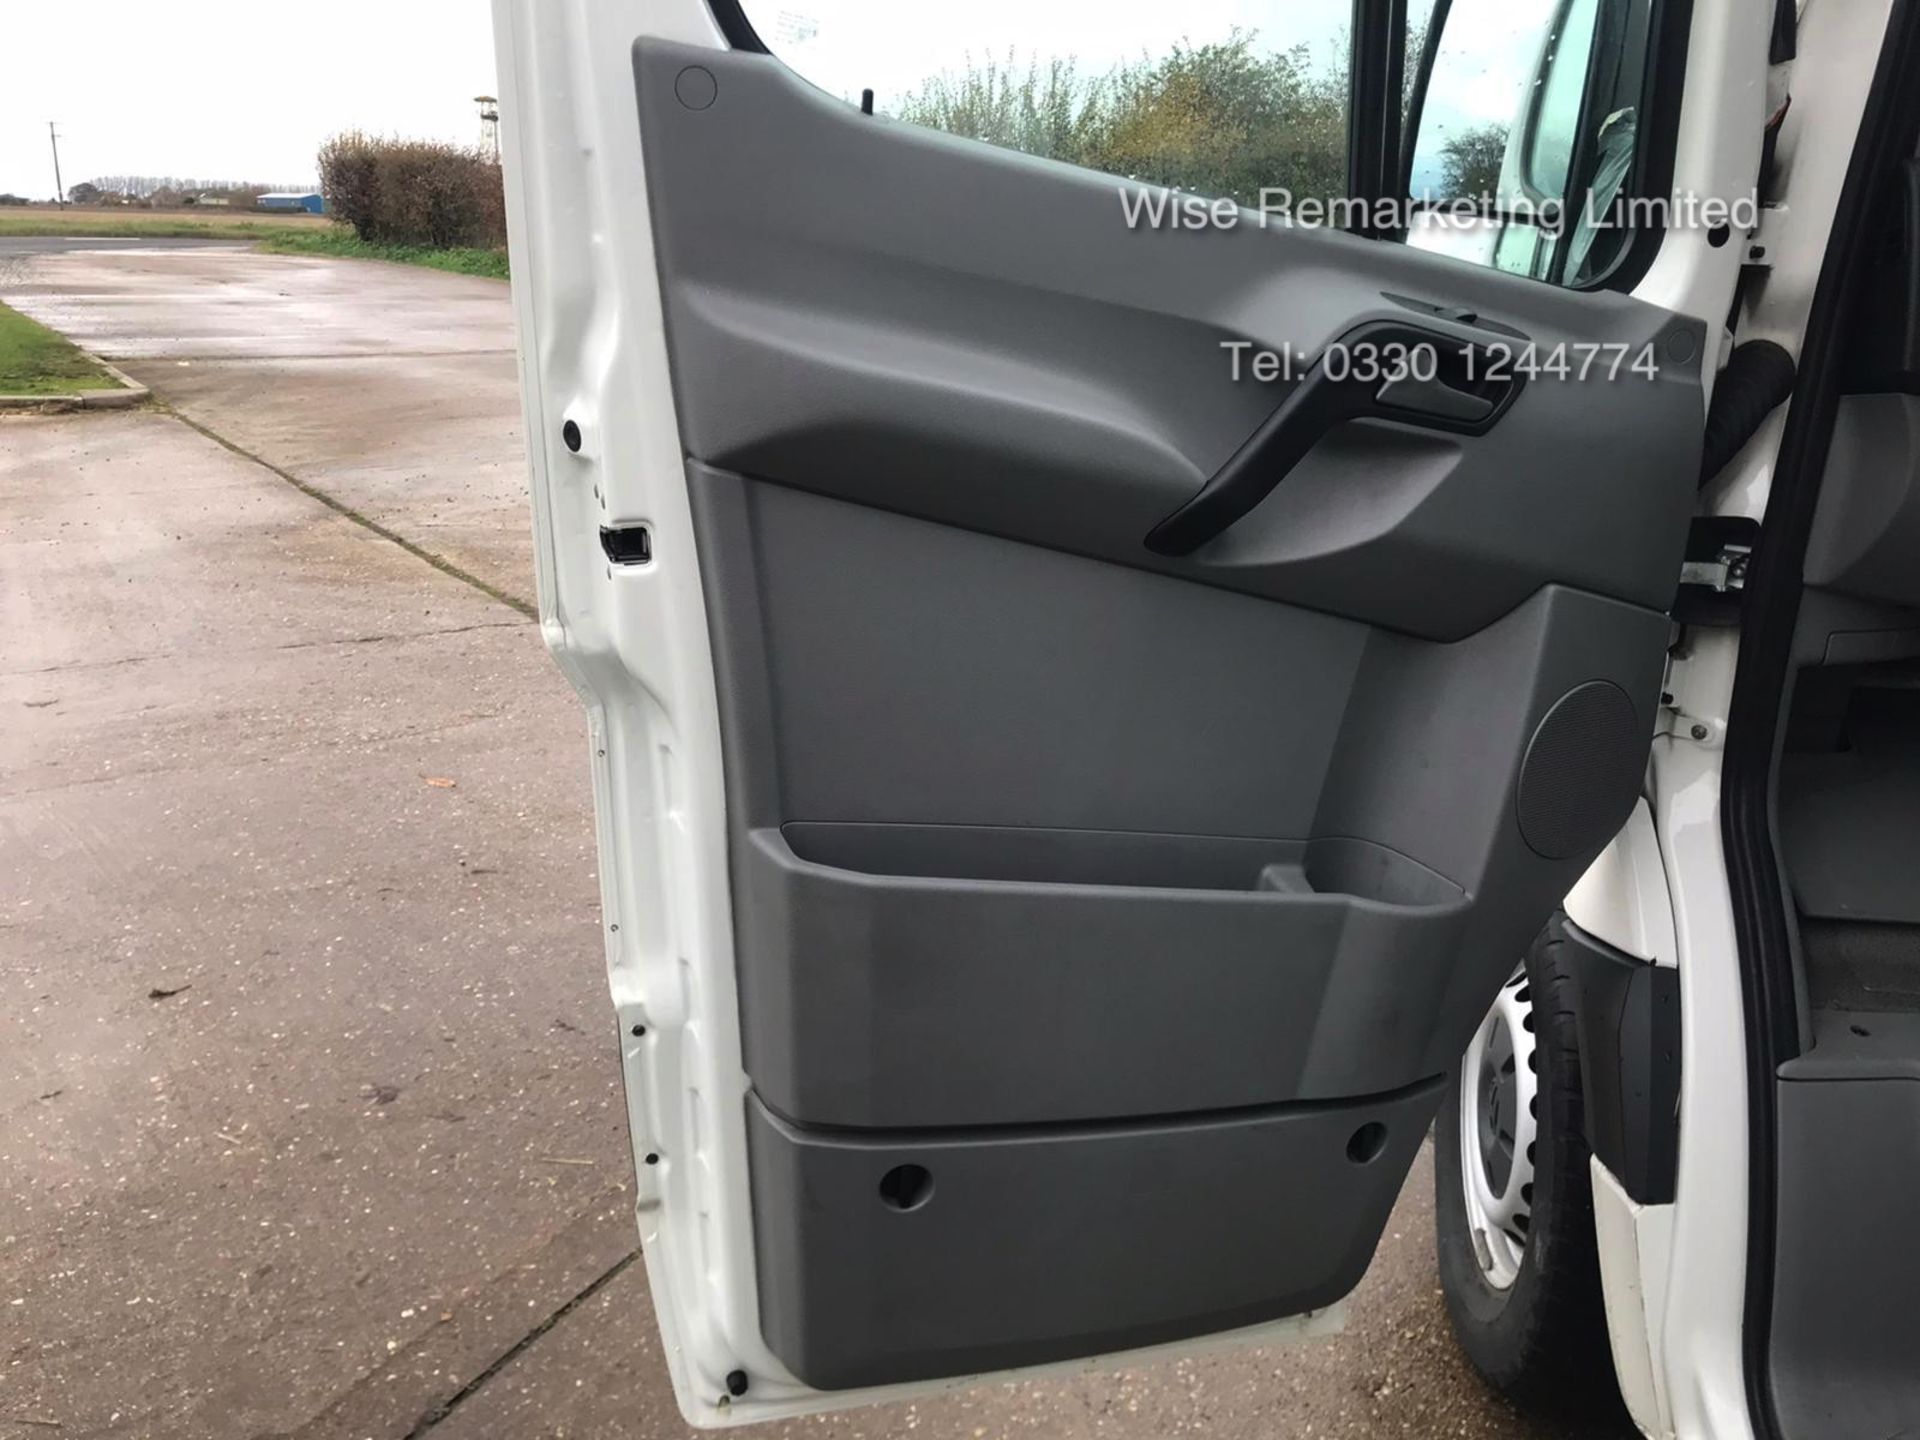 Volkswagen Crafter CR35 Startline 2.0l TDi - LWB - 2016 Model -1 Keeper From New - Service History - Image 9 of 15